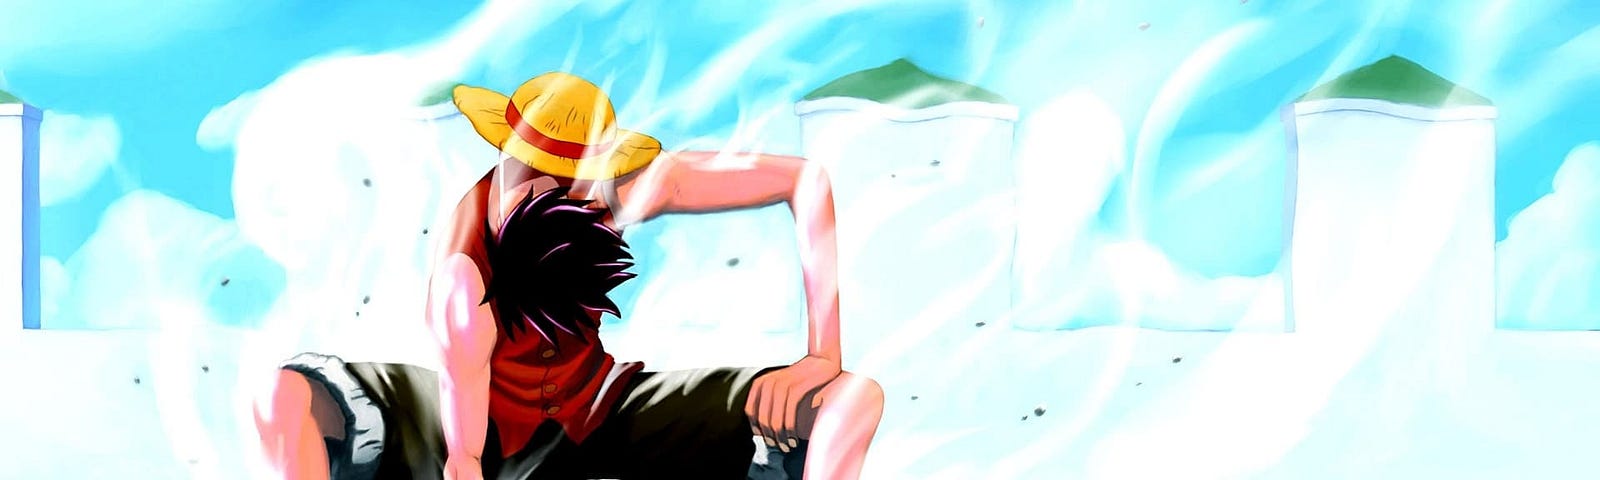 Latest Stories Published On One Piece Series 21 Episode 948 Medium